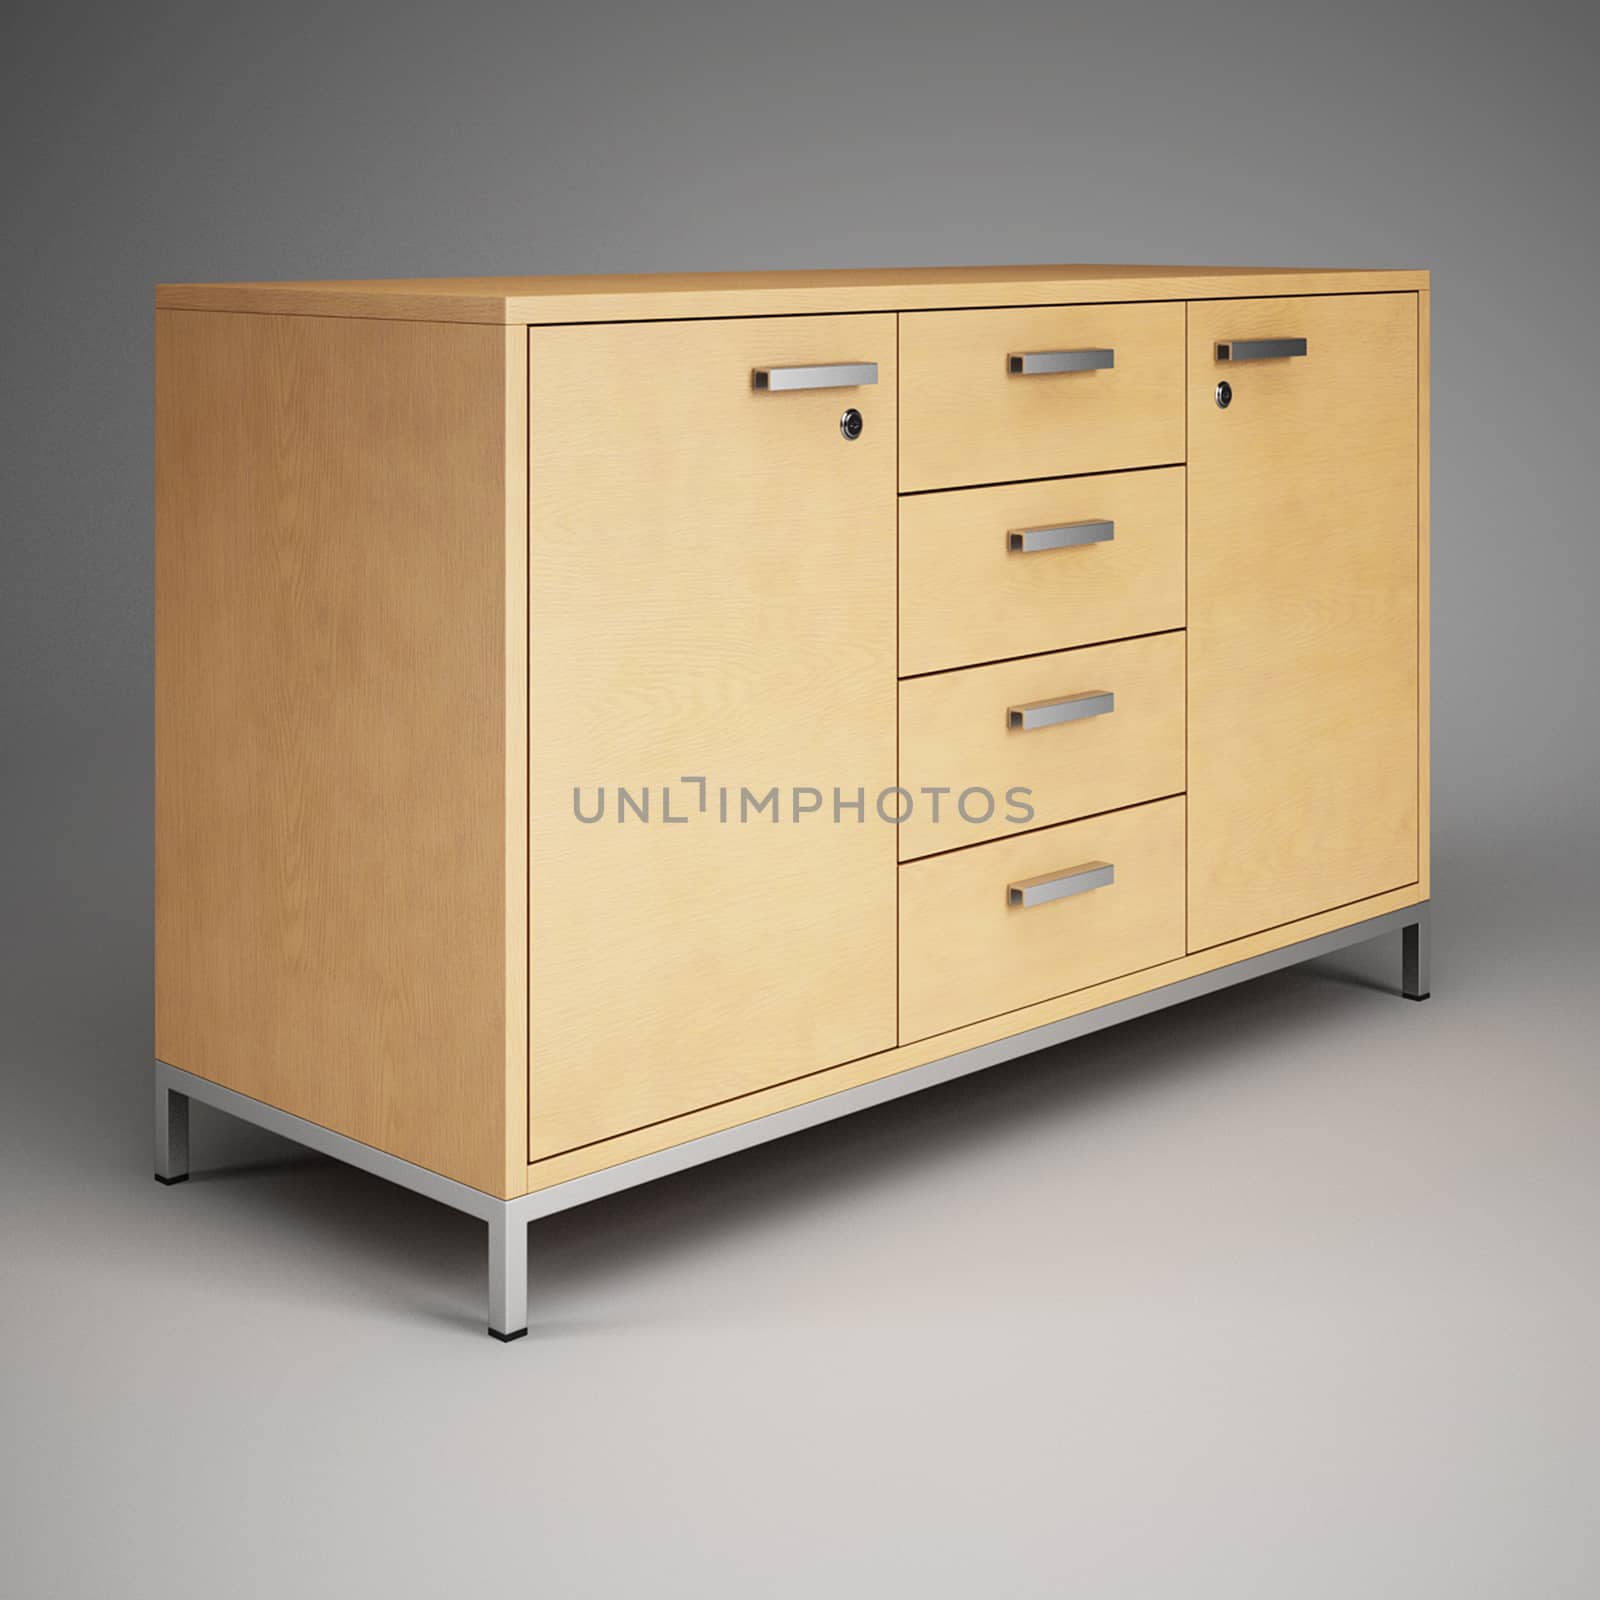 Mobile bedside table with drawers. 3D rendering. by georgina198